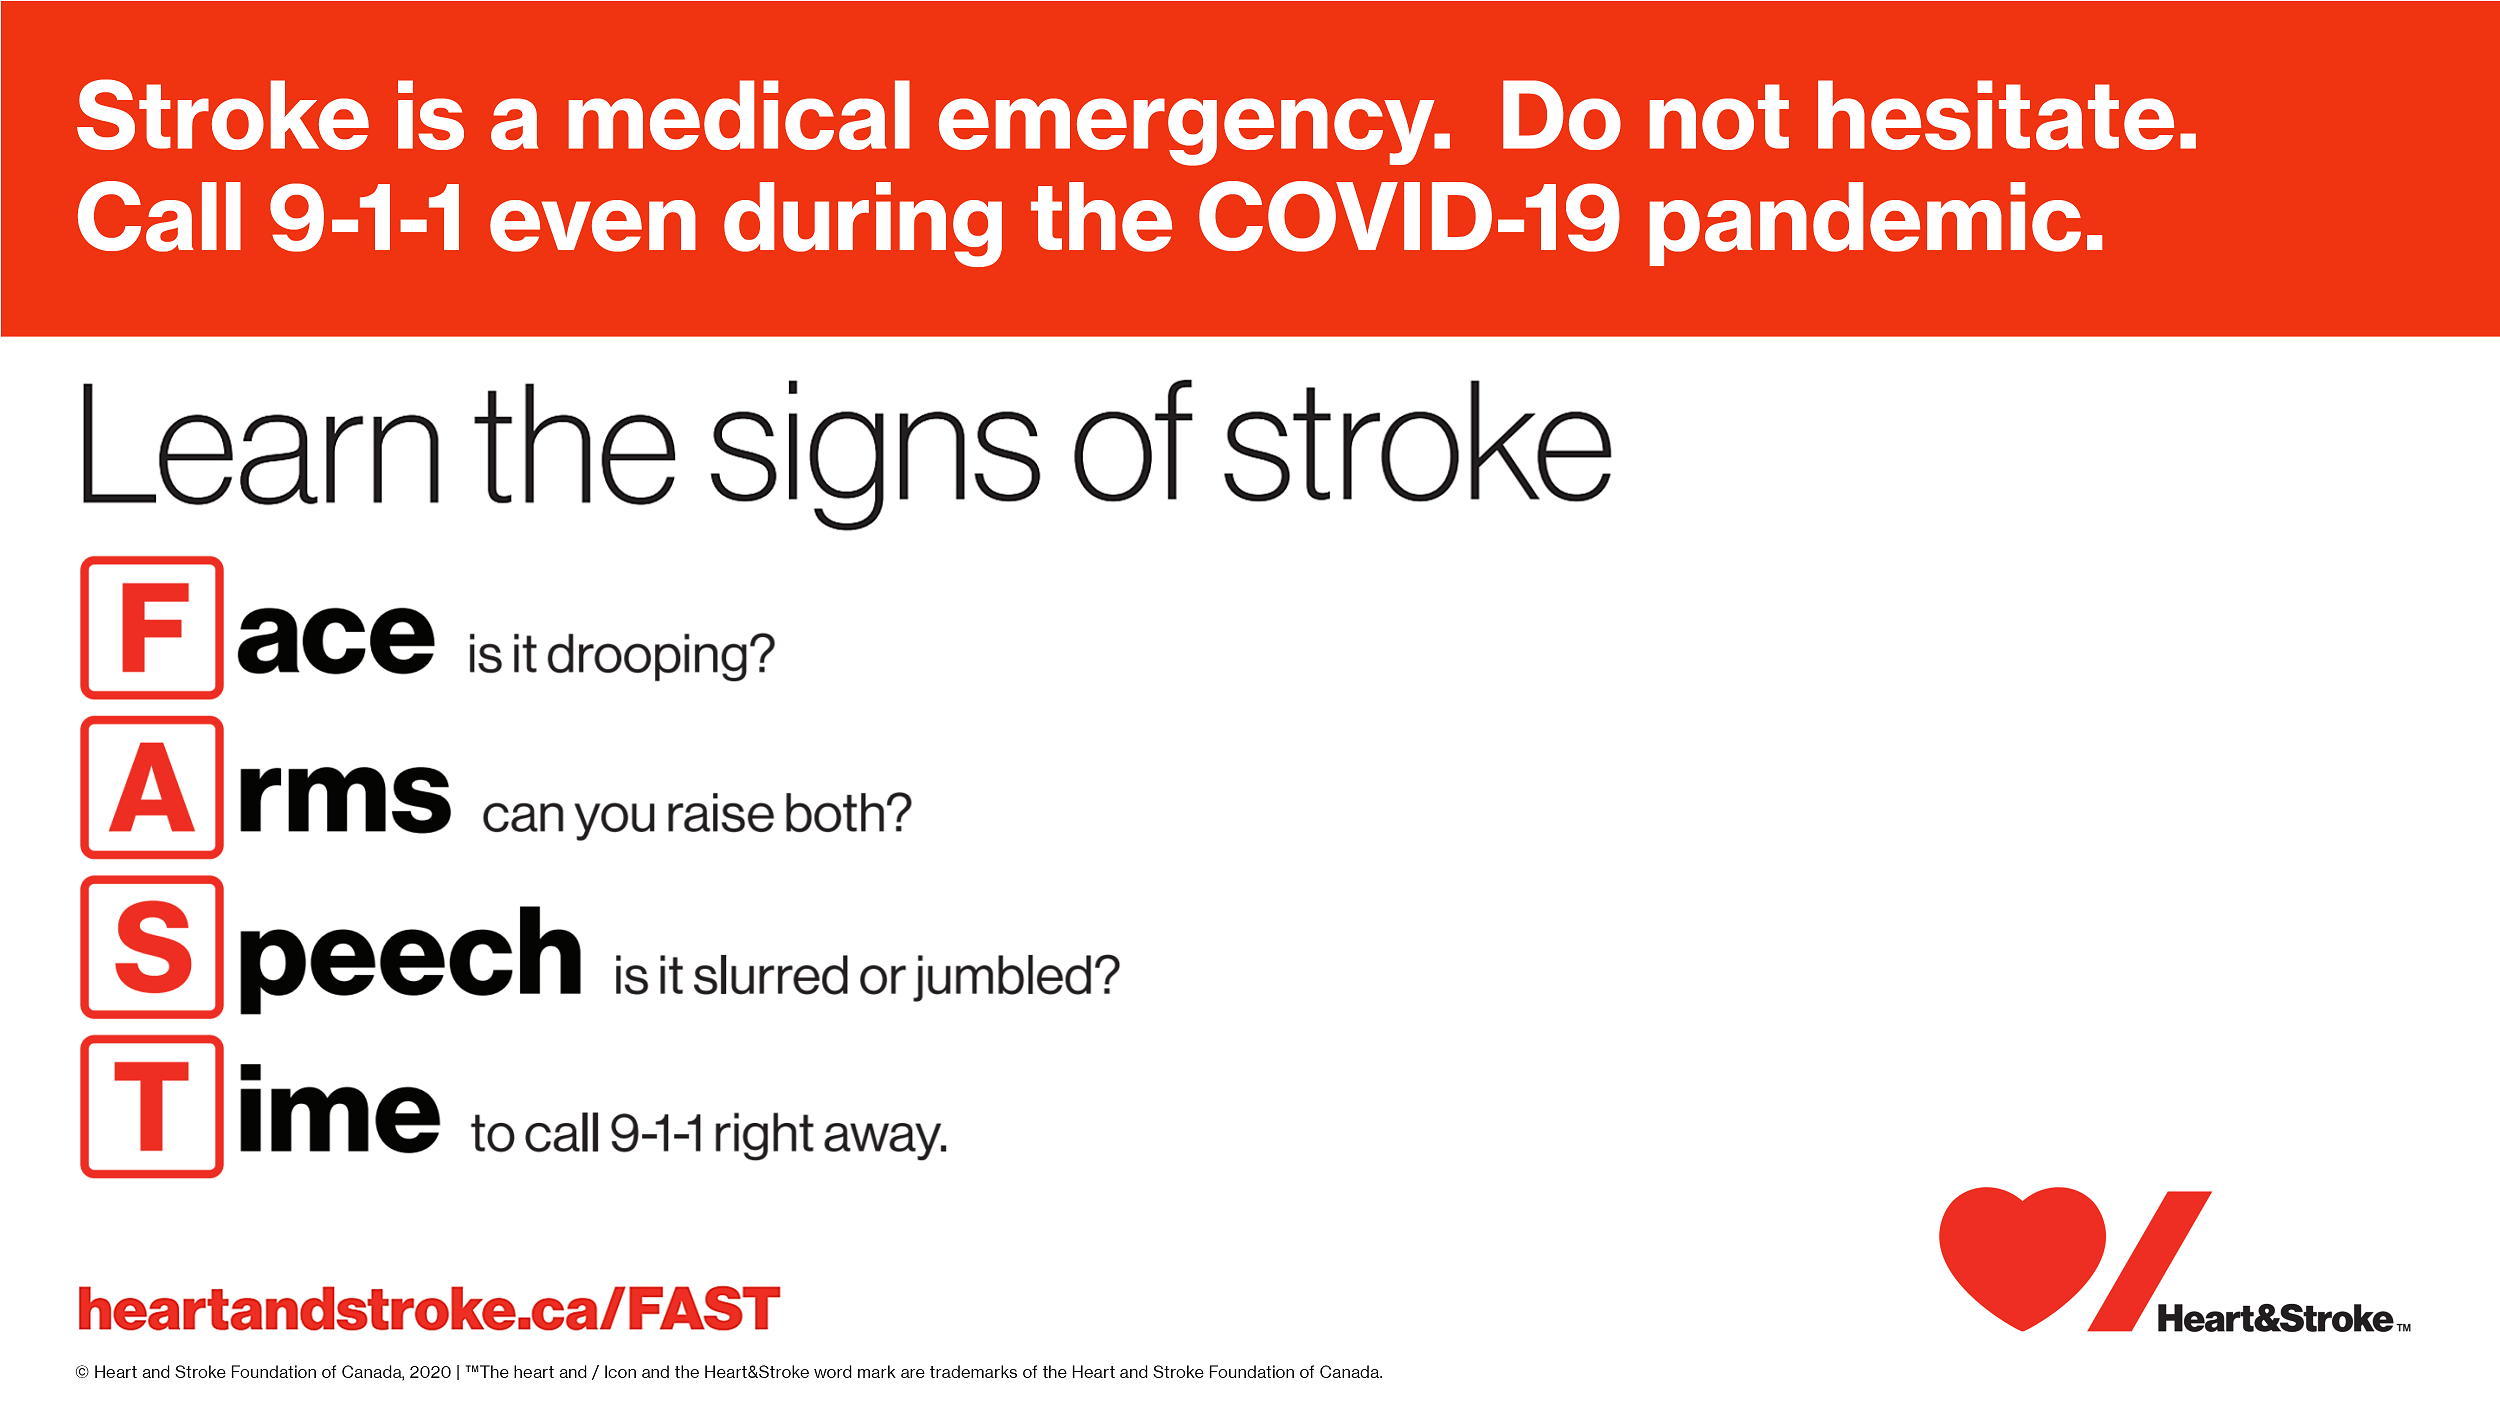 Learn the Signs of a Stroke - Stroke is a medical emergency. Do not hesitate. Call 9-1-1 even during the COVID-19 pandemic. Face - is it drooping, Arms - can you raise both?, Speech - is it slurred or jumbled?, Time - to call 9-1-1 right away. heartandstroke.ca/FAST